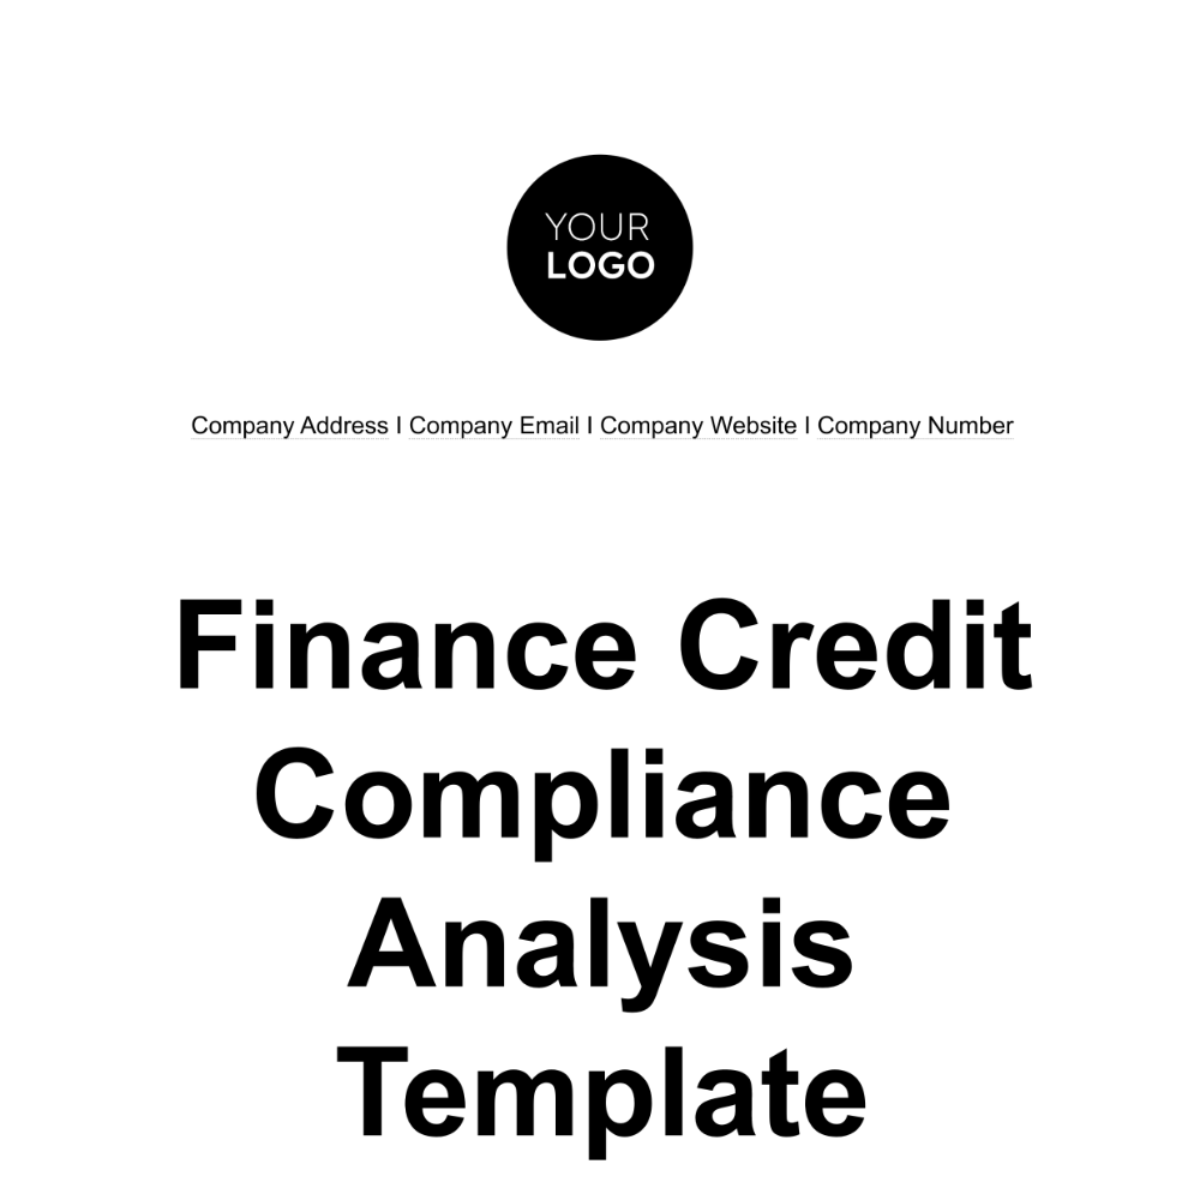 Free Finance Credit Compliance Analysis Template